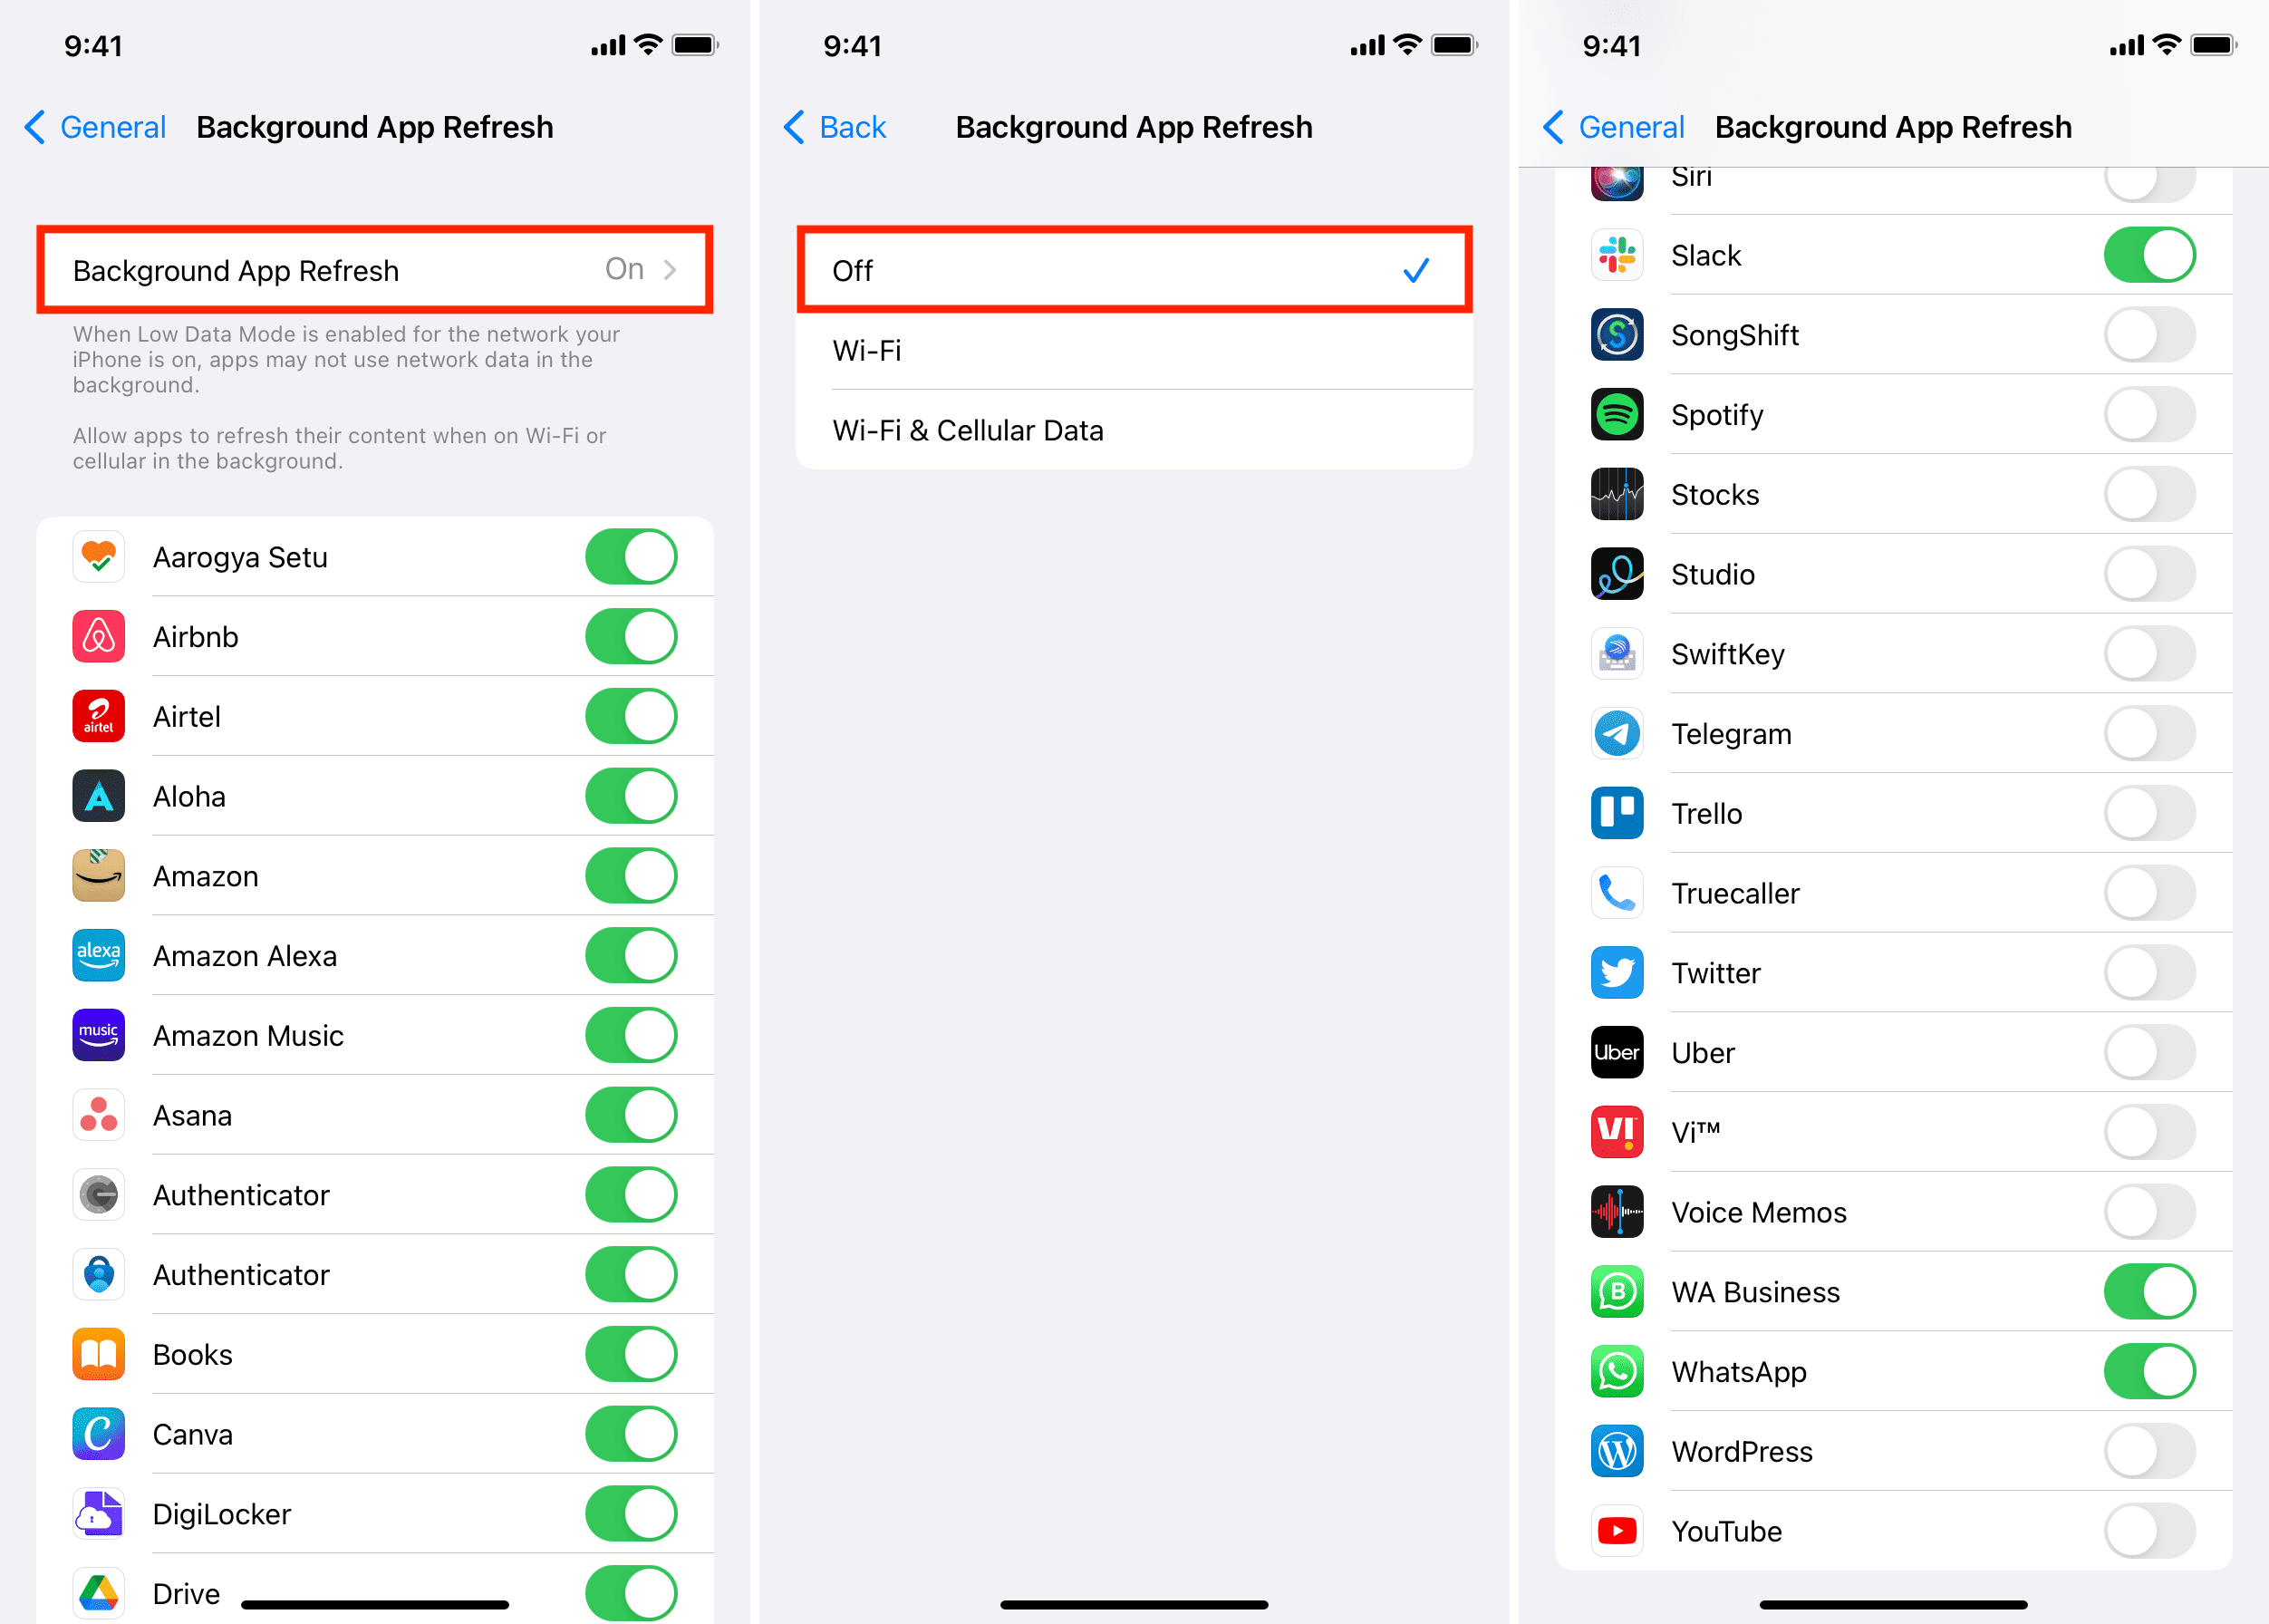 Disable Background App Refresh on iPhone